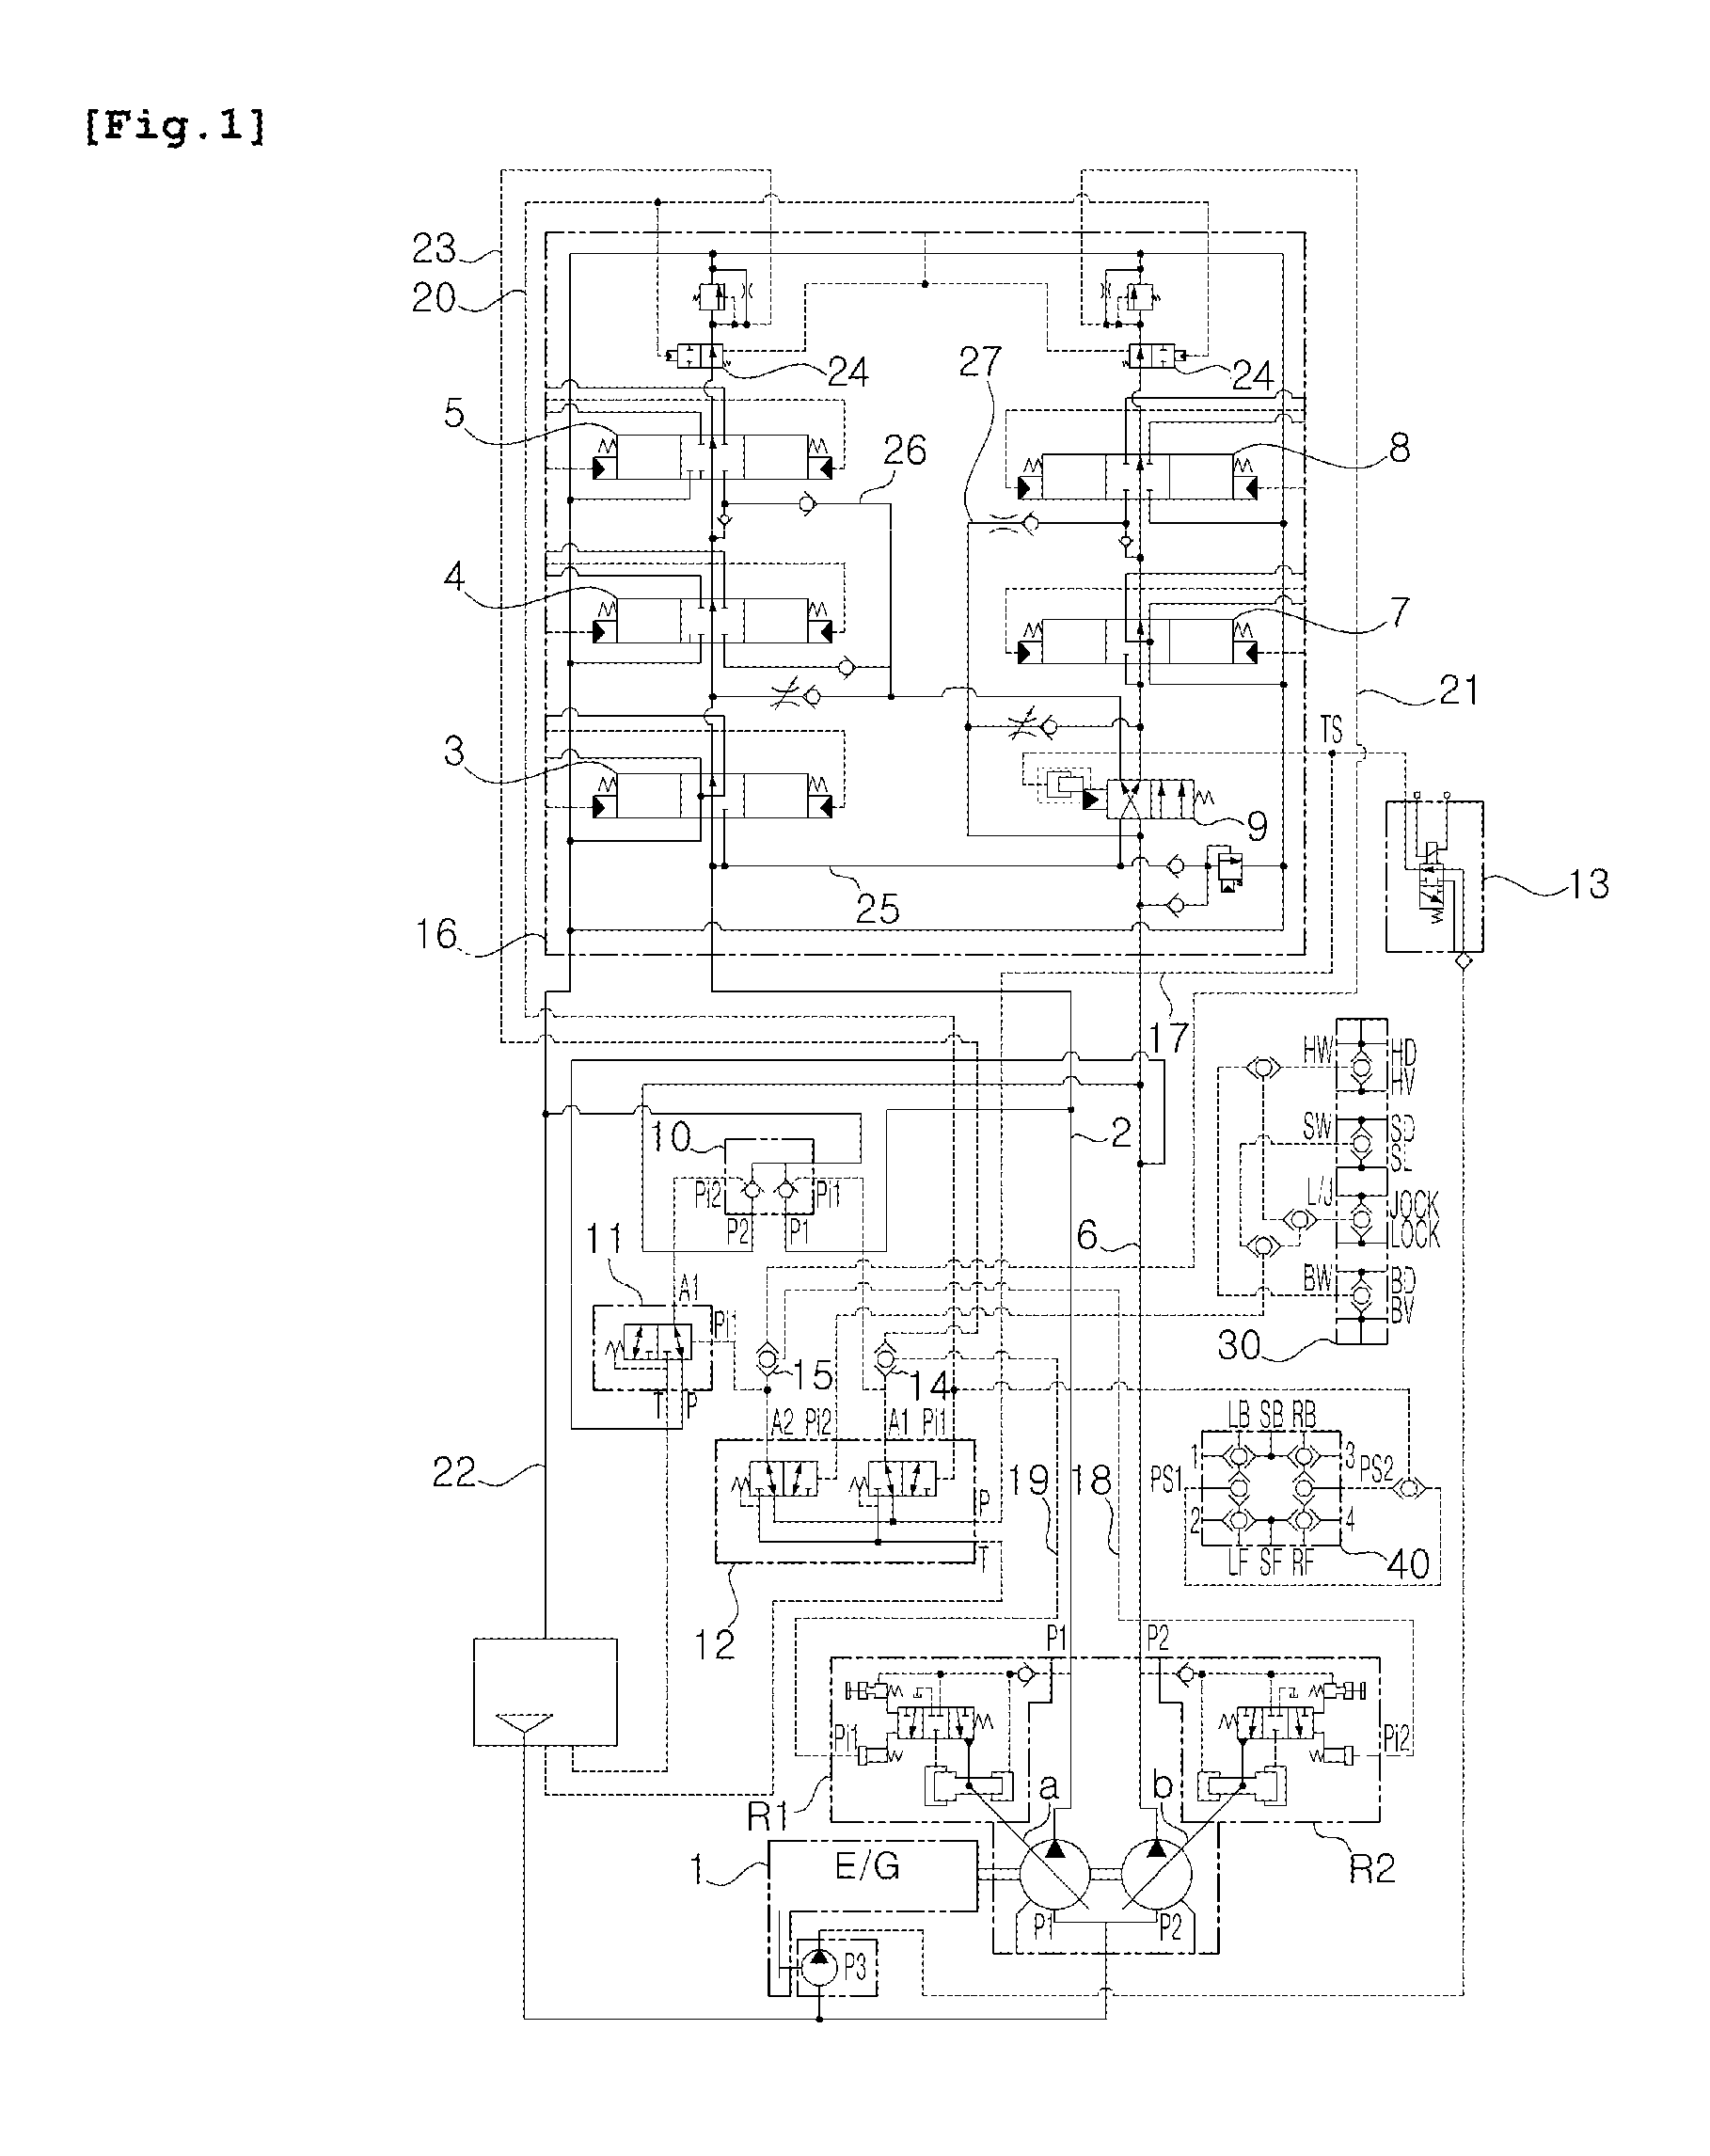 Hydraulic circuit for pipe layer